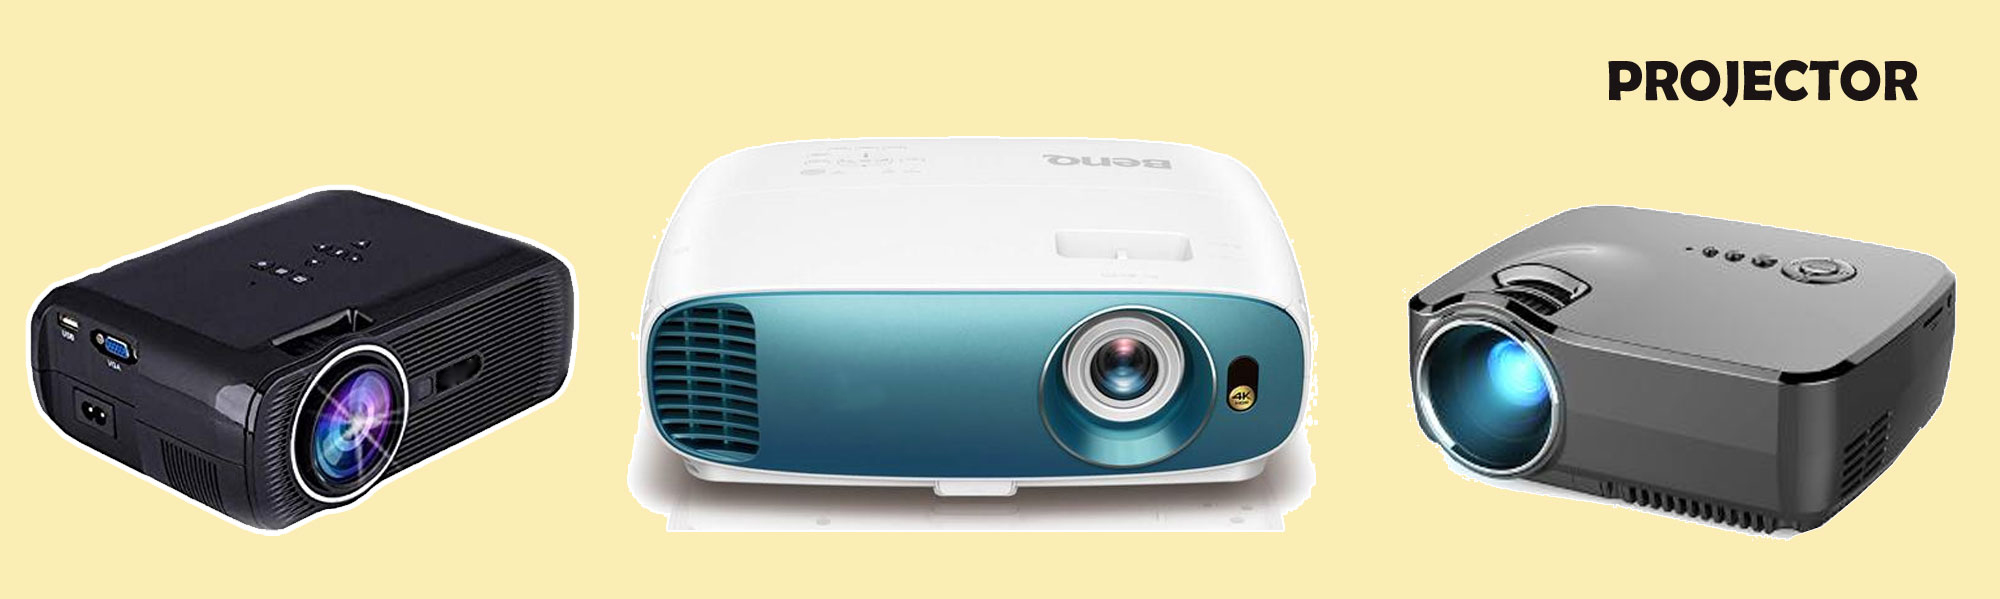 Canon Projector on Rent